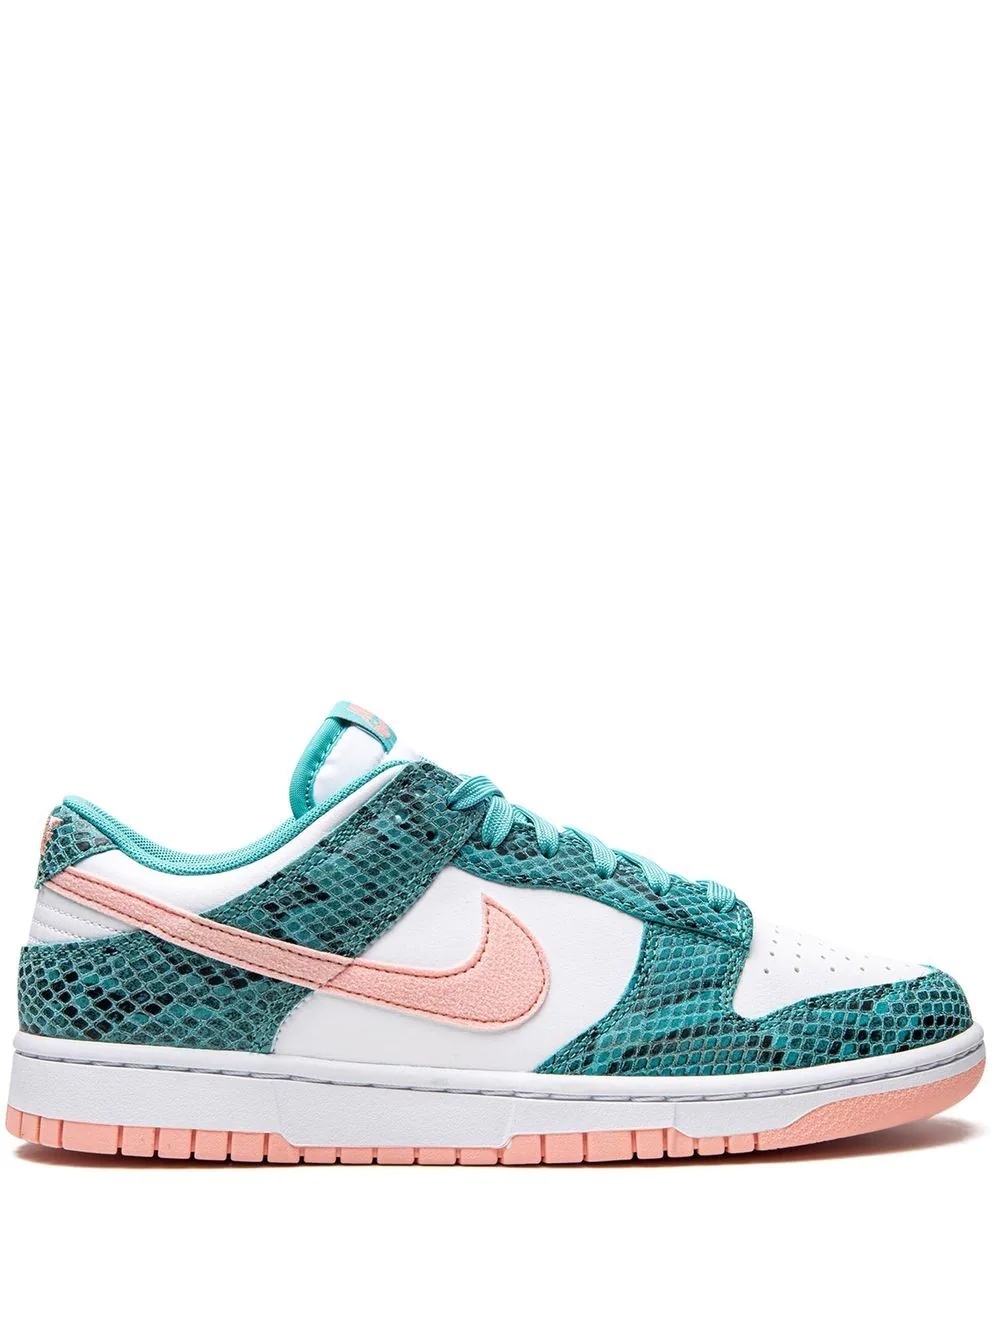 Dunk Low Snakeskin "Washed Teal/Bleached Coral" sneakers - 1